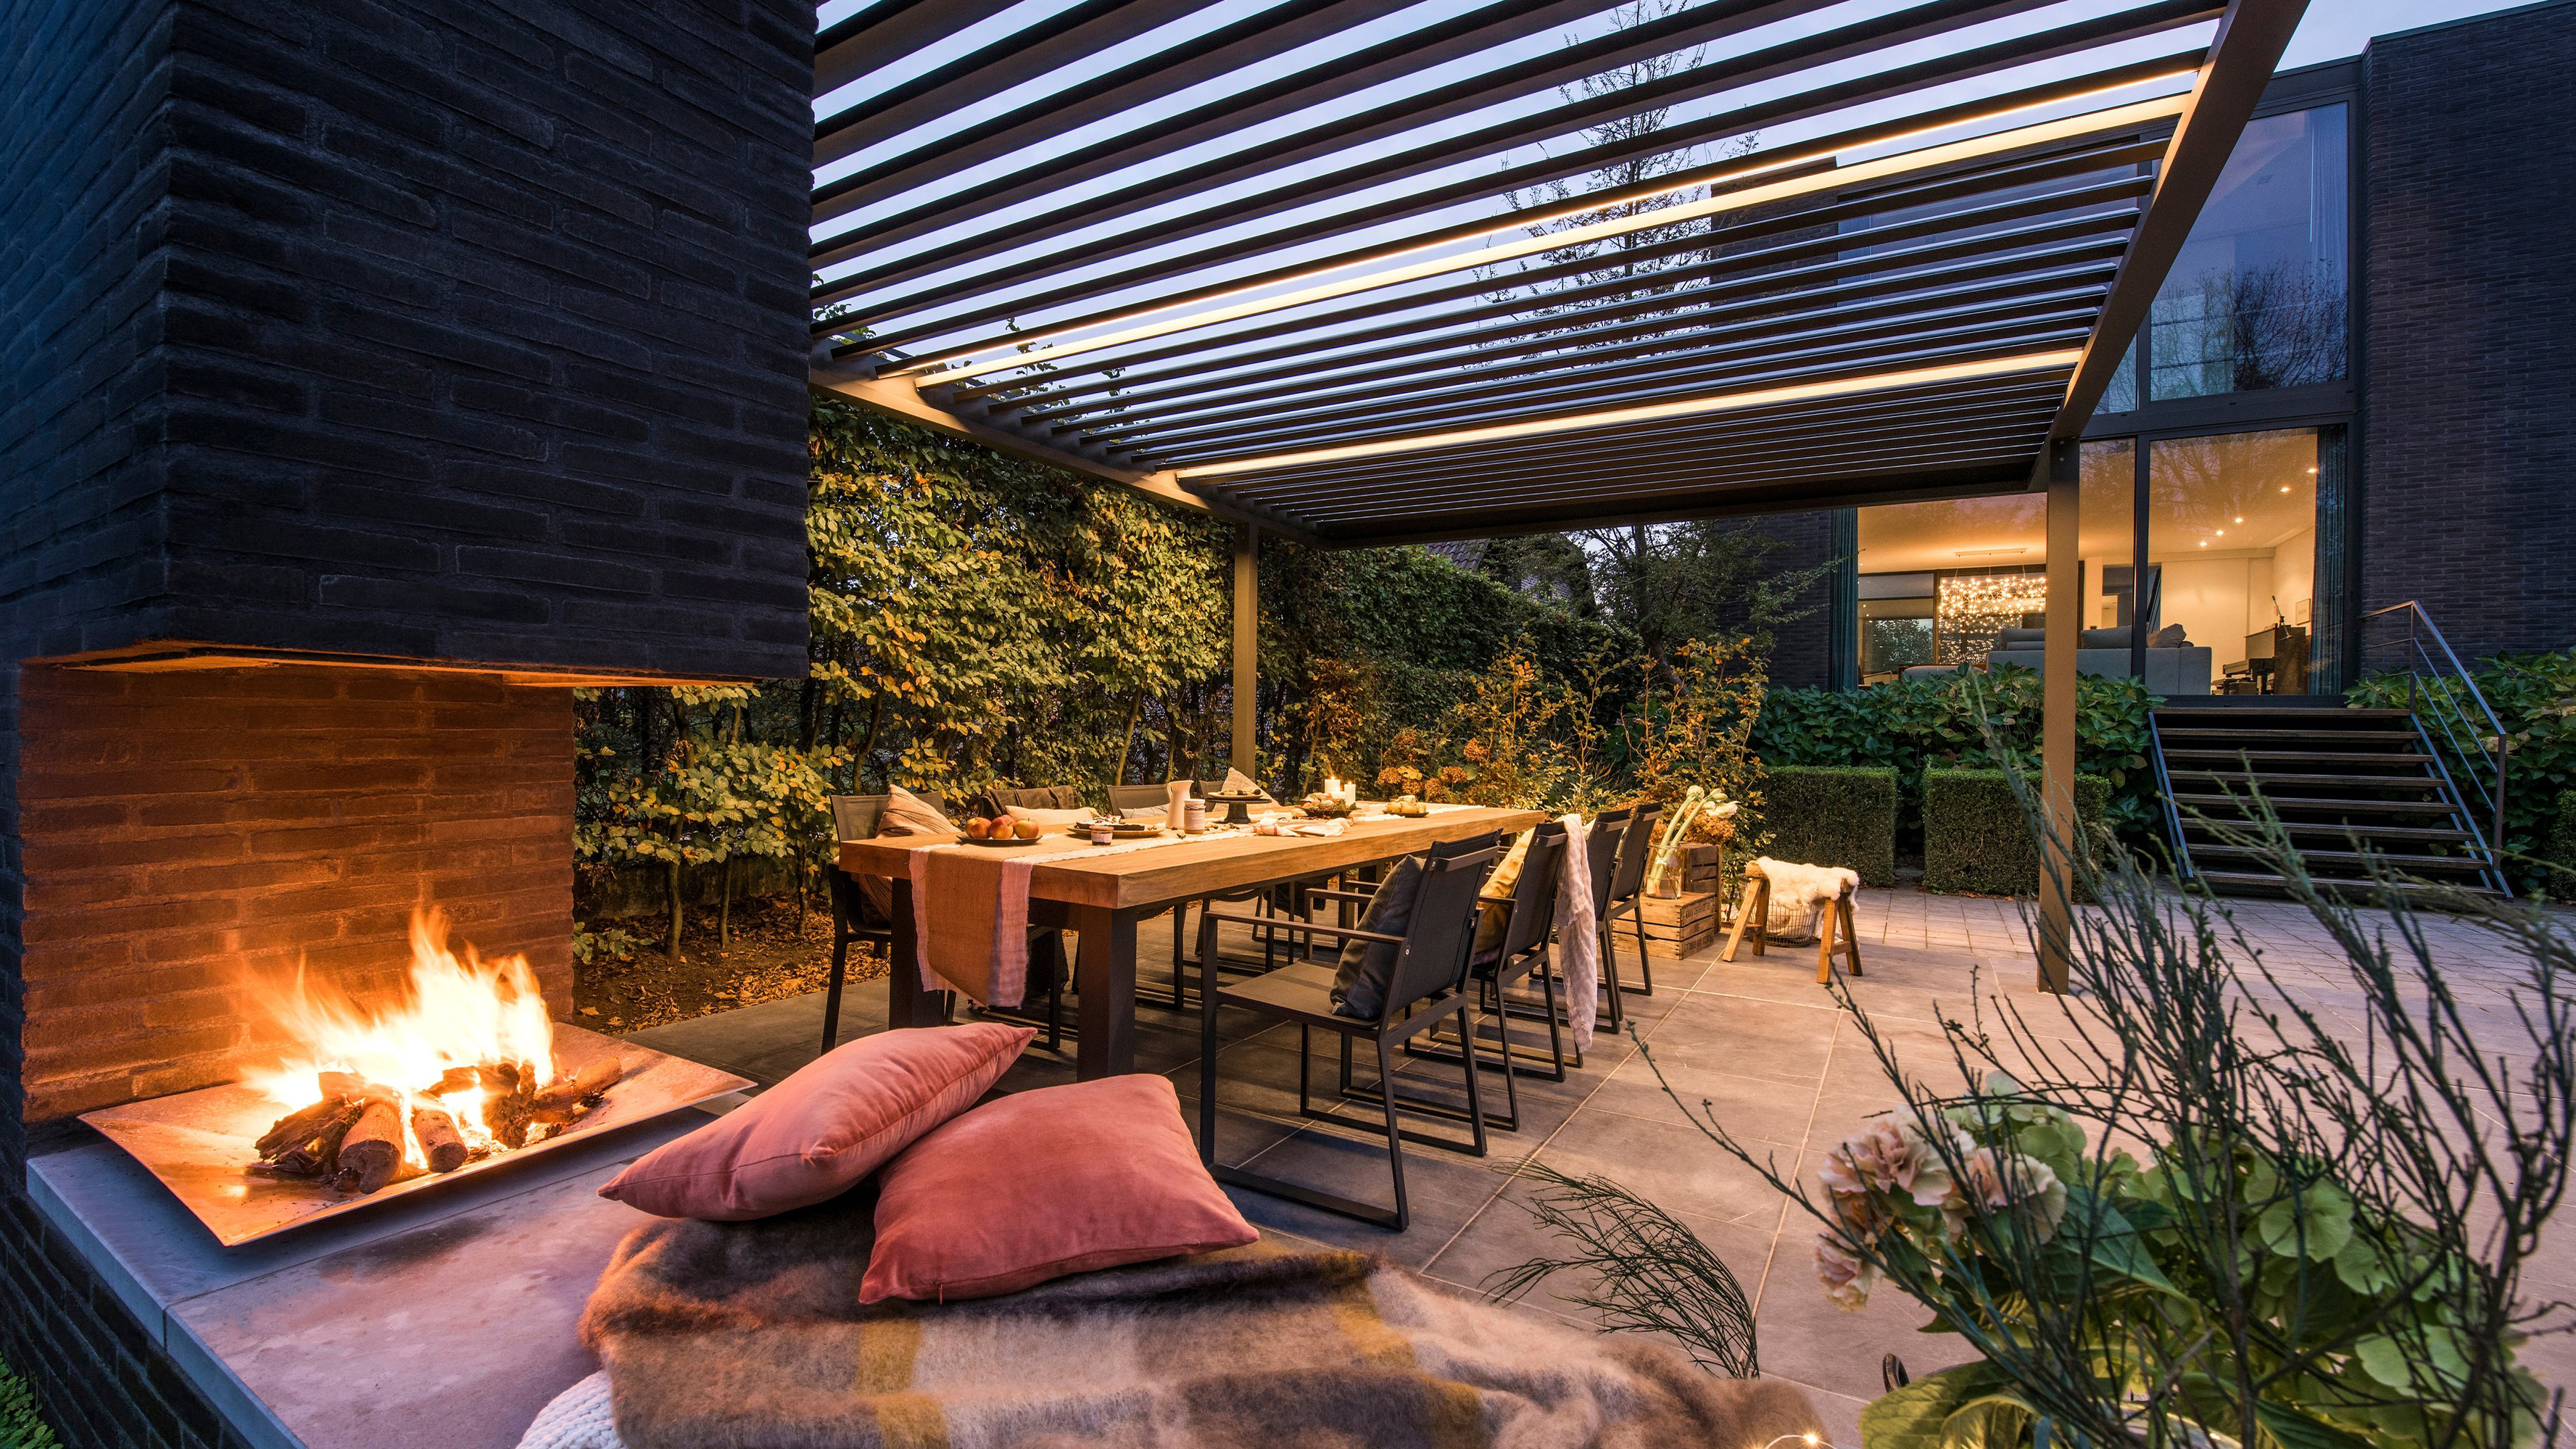 10 Patio Cover Ideas to Spruce Up Your Outdoor Space